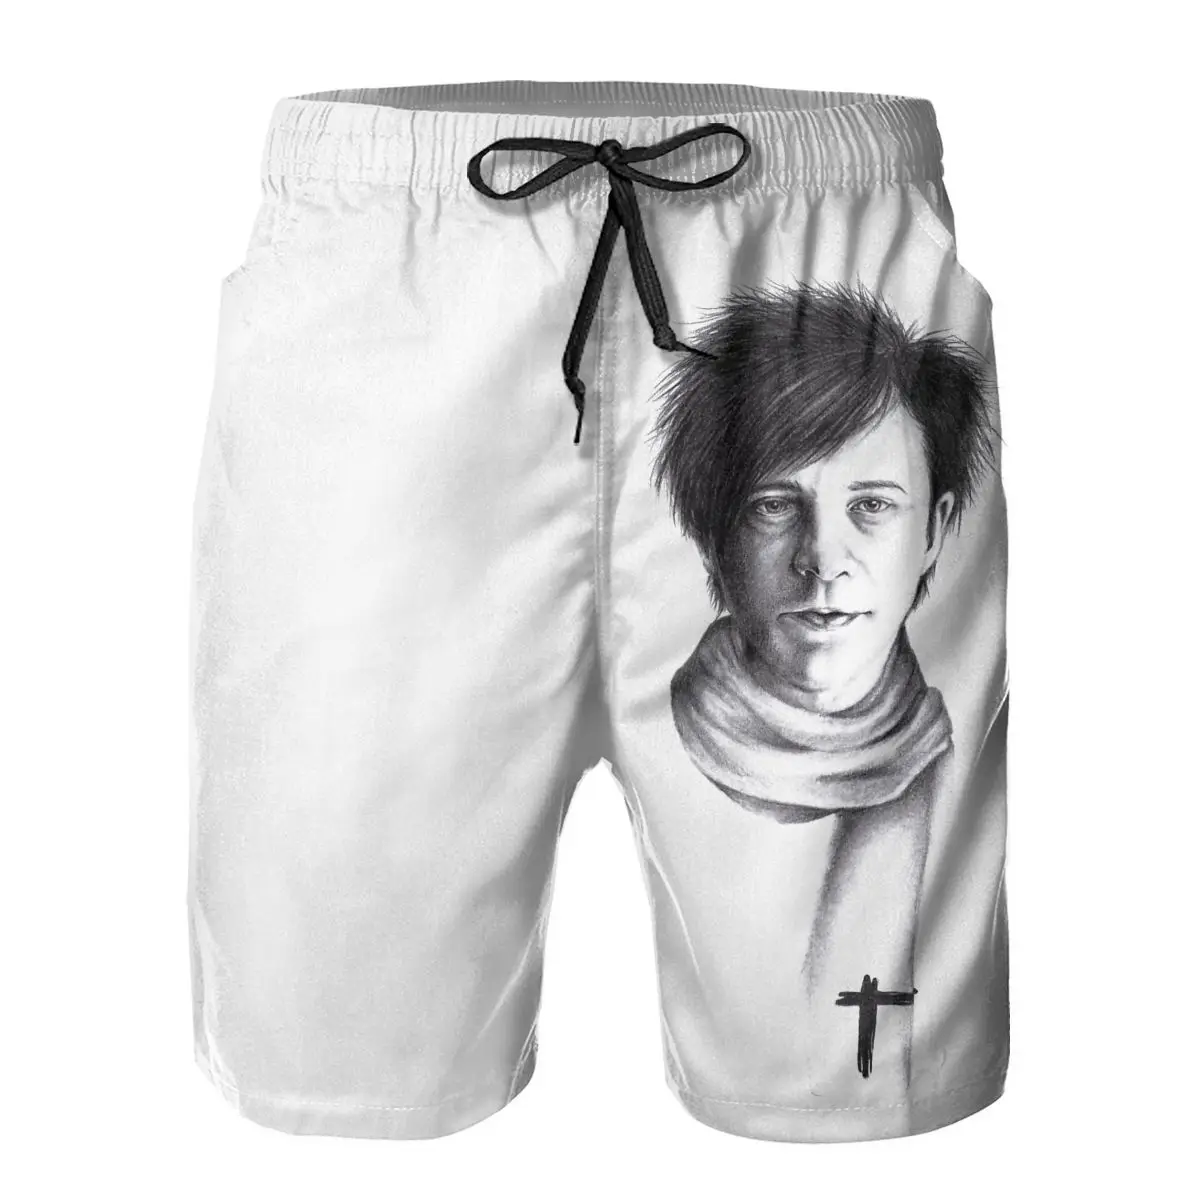 

R145 Sports Drawing Of Nicola Sirkis Of Indochine Tank Top Short Breathable Quick Dry Humor Graphic Hawaii Pants